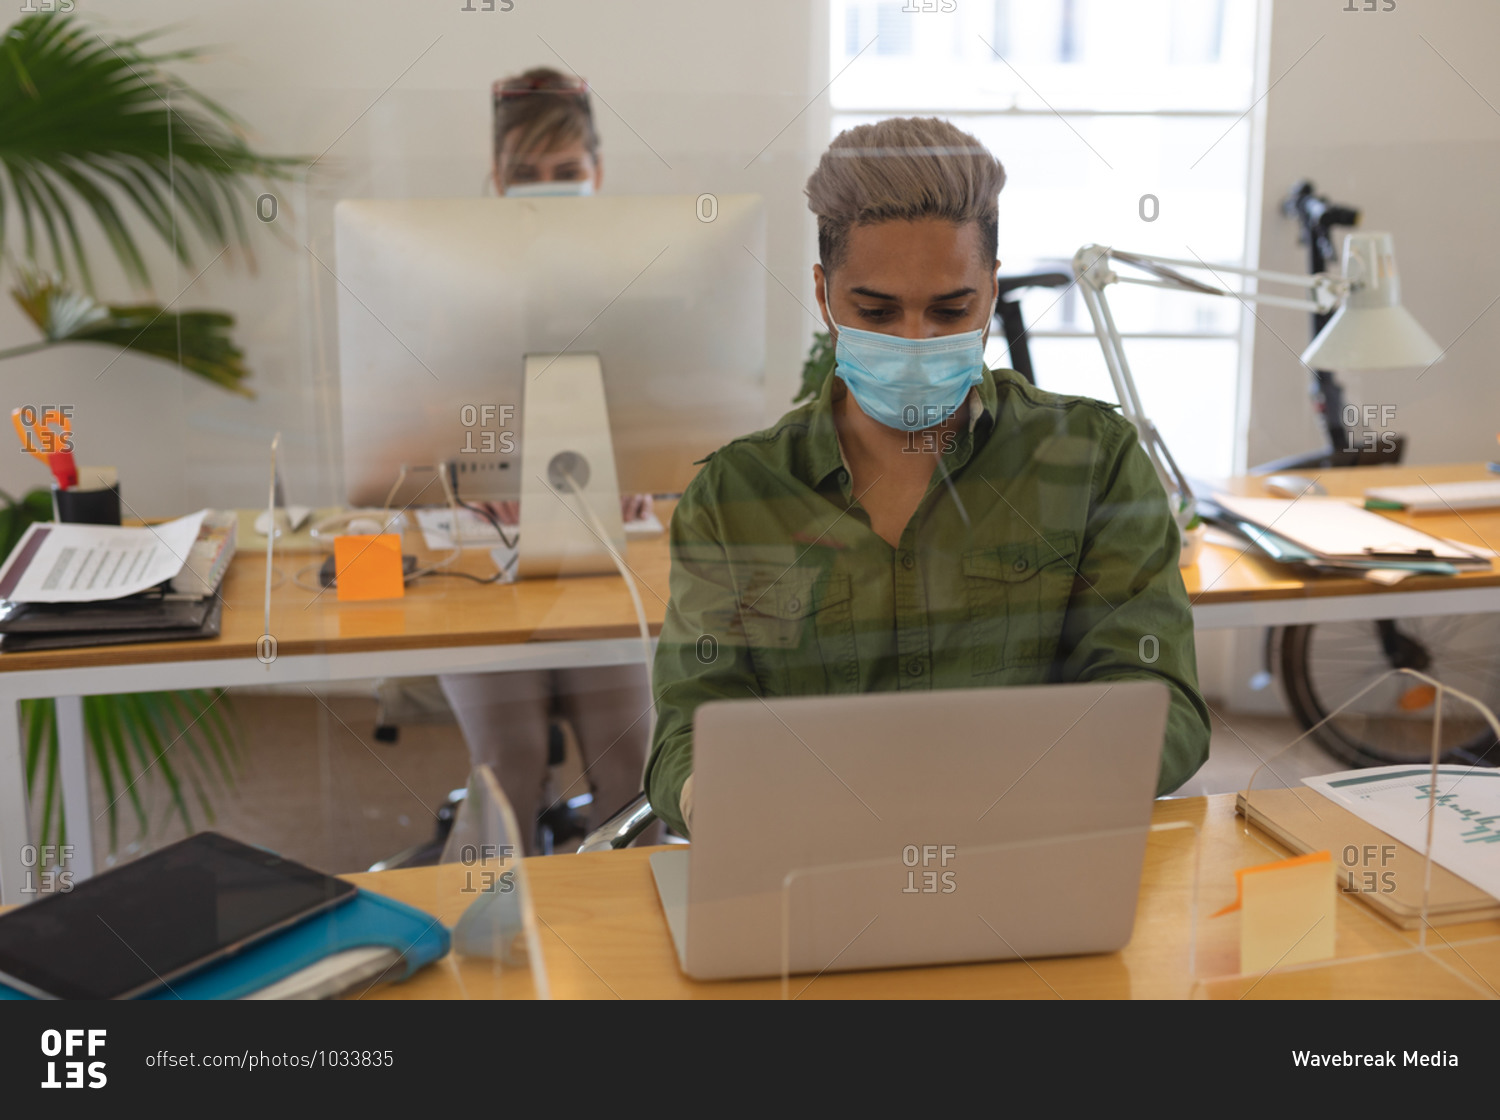 Multi ethnic group of male and female creatives working at office desks with protective screens, using computers. Health and hygiene in workplace during Coronavirus Covid 19 pandemic.